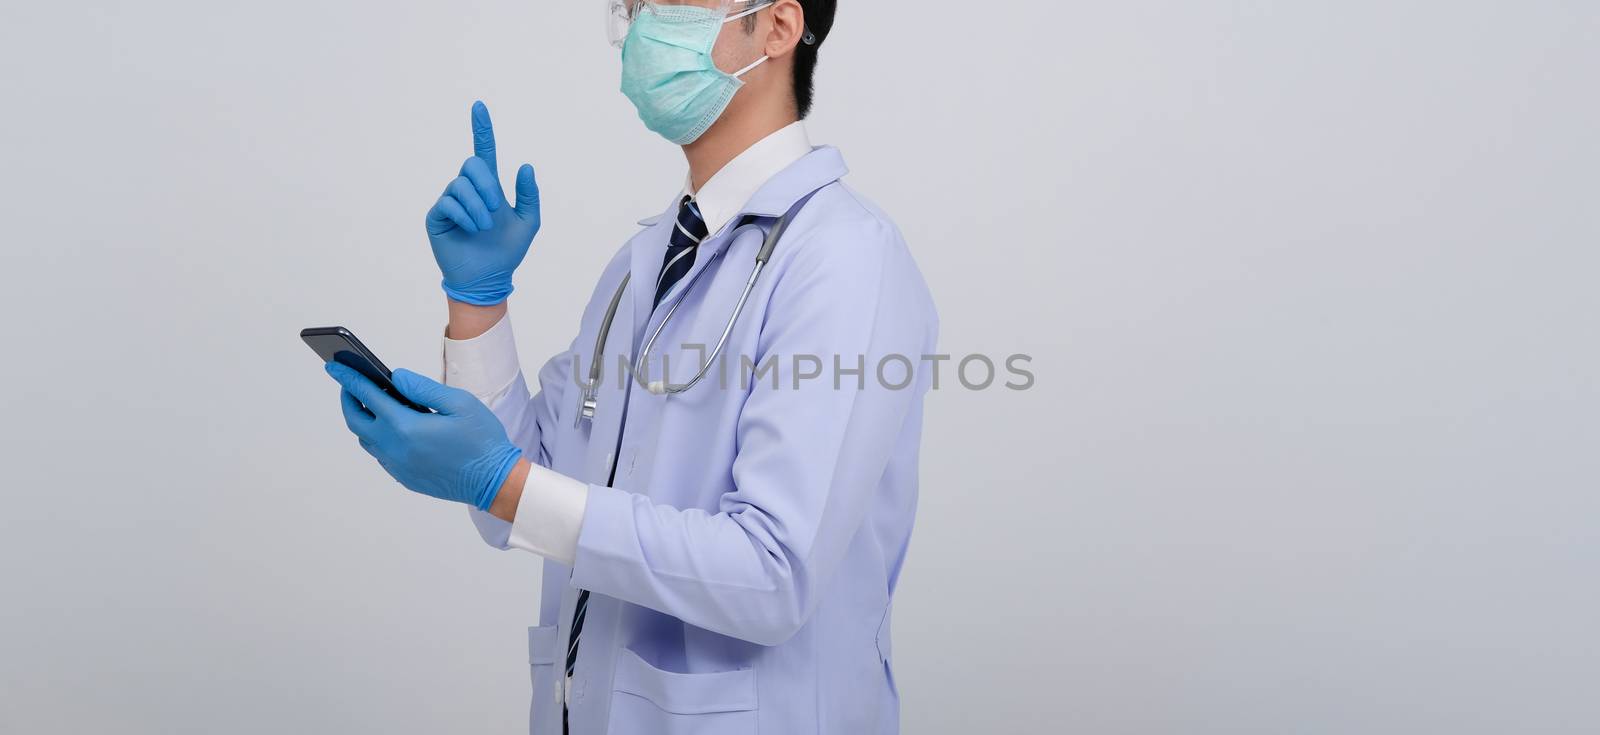 doctor physician practitioner wearing mask with smartphone & ste by pp99